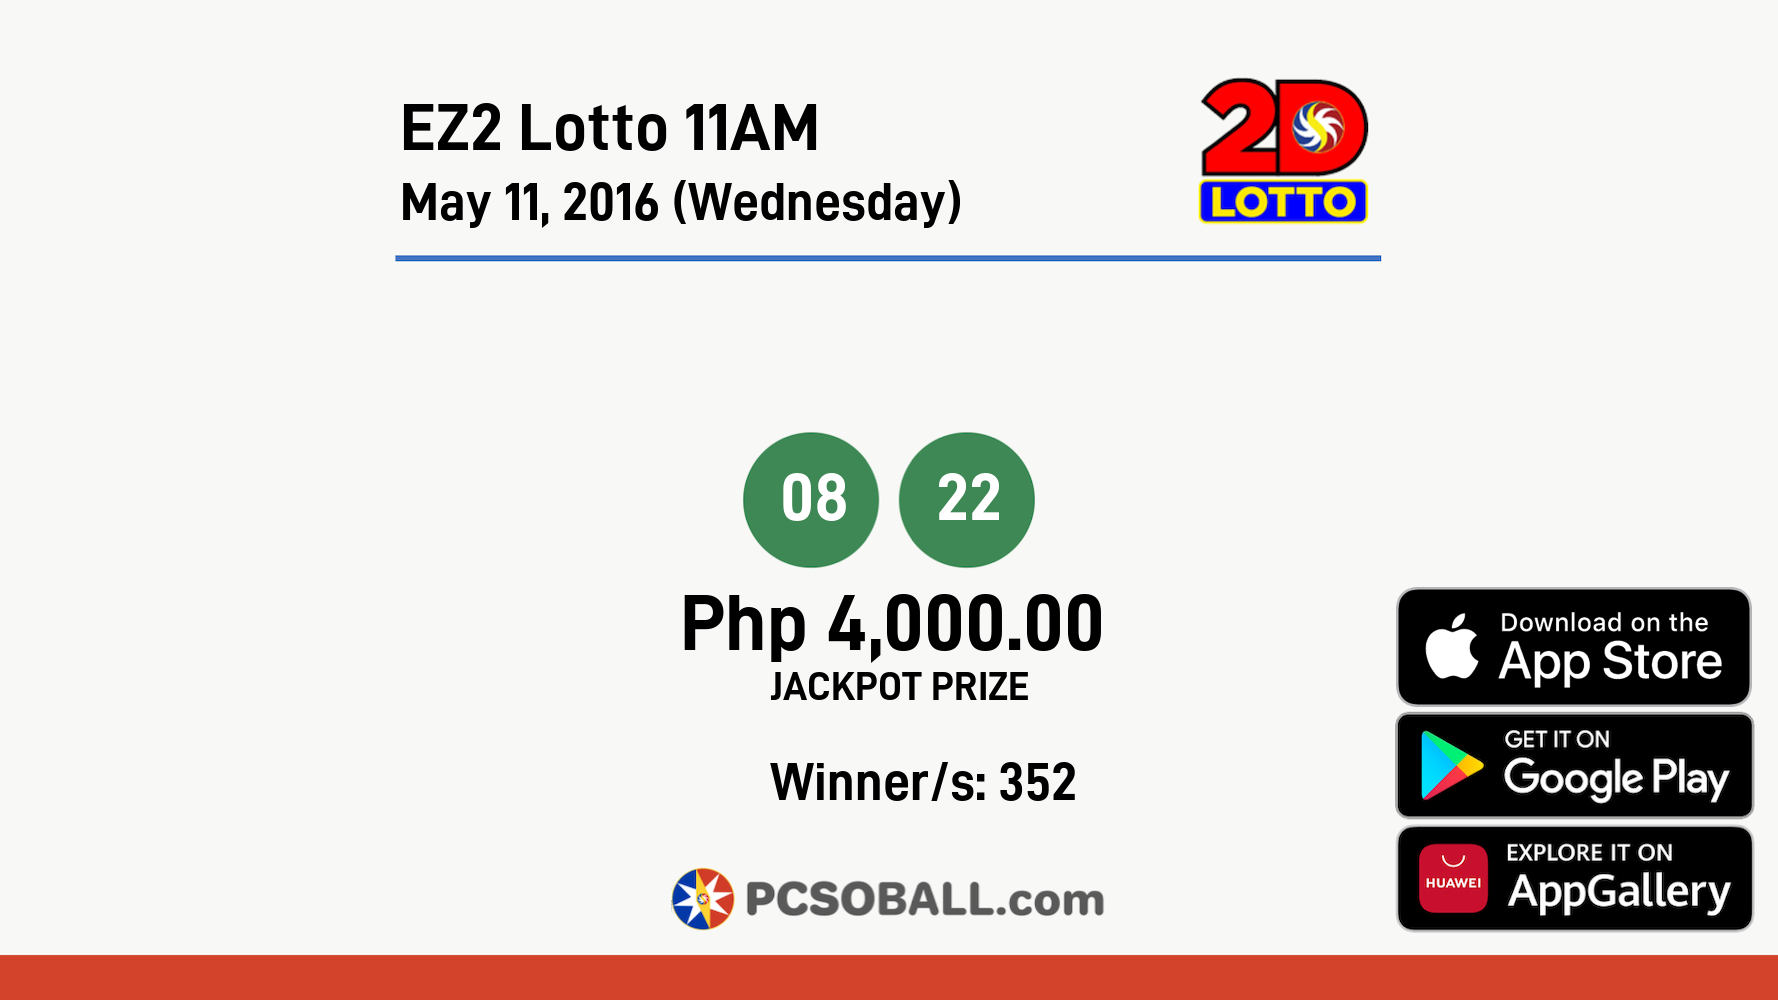 EZ2 Lotto 11AM May 11, 2016 (Wednesday) Result